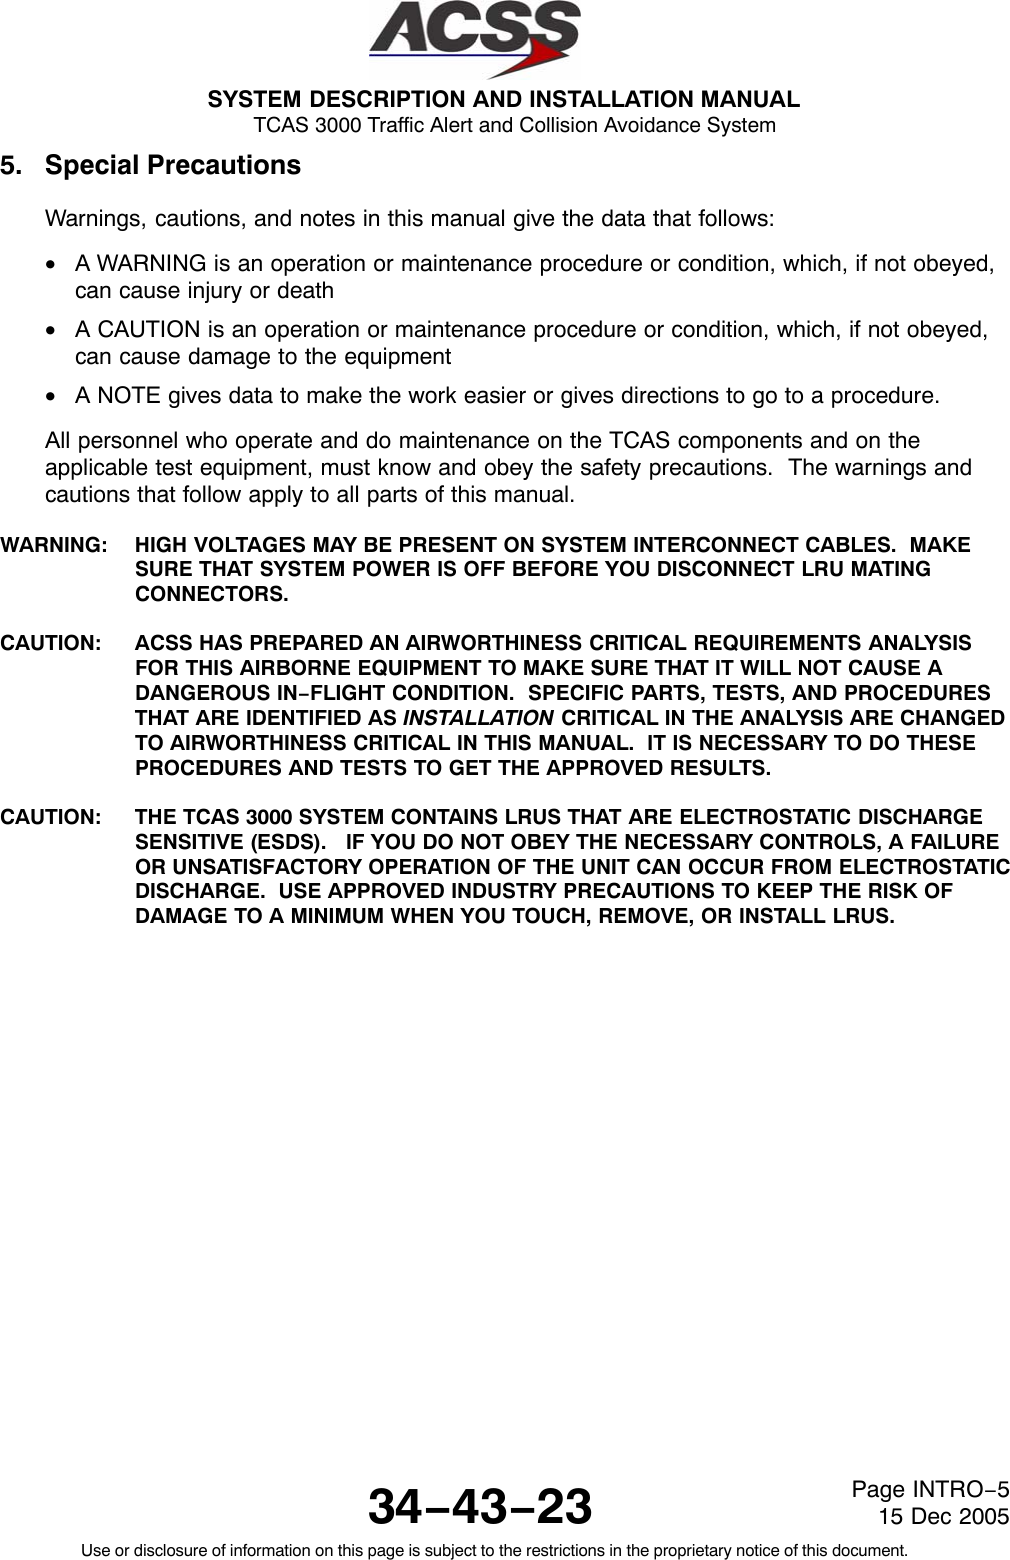 SYSTEM DESCRIPTION AND INSTALLATION MANUAL TCAS 3000 Traffic Alert and Collision Avoidance System34−43−23Use or disclosure of information on this page is subject to the restrictions in the proprietary notice of this document.Page INTRO−515 Dec 20055. Special PrecautionsWarnings, cautions, and notes in this manual give the data that follows:•A WARNING is an operation or maintenance procedure or condition, which, if not obeyed,can cause injury or death•A CAUTION is an operation or maintenance procedure or condition, which, if not obeyed,can cause damage to the equipment•A NOTE gives data to make the work easier or gives directions to go to a procedure.All personnel who operate and do maintenance on the TCAS components and on theapplicable test equipment, must know and obey the safety precautions.  The warnings andcautions that follow apply to all parts of this manual.WARNING: HIGH VOLTAGES MAY BE PRESENT ON SYSTEM INTERCONNECT CABLES.  MAKESURE THAT SYSTEM POWER IS OFF BEFORE YOU DISCONNECT LRU MATINGCONNECTORS.CAUTION: ACSS HAS PREPARED AN AIRWORTHINESS CRITICAL REQUIREMENTS ANALYSISFOR THIS AIRBORNE EQUIPMENT TO MAKE SURE THAT IT WILL NOT CAUSE ADANGEROUS IN−FLIGHT CONDITION.  SPECIFIC PARTS, TESTS, AND PROCEDURESTHAT ARE IDENTIFIED AS INSTALLATION CRITICAL IN THE ANALYSIS ARE CHANGEDTO AIRWORTHINESS CRITICAL IN THIS MANUAL.  IT IS NECESSARY TO DO THESEPROCEDURES AND TESTS TO GET THE APPROVED RESULTS.CAUTION: THE TCAS 3000 SYSTEM CONTAINS LRUS THAT ARE ELECTROSTATIC DISCHARGESENSITIVE (ESDS).   IF YOU DO NOT OBEY THE NECESSARY CONTROLS, A FAILUREOR UNSATISFACTORY OPERATION OF THE UNIT CAN OCCUR FROM ELECTROSTATICDISCHARGE.  USE APPROVED INDUSTRY PRECAUTIONS TO KEEP THE RISK OFDAMAGE TO A MINIMUM WHEN YOU TOUCH, REMOVE, OR INSTALL LRUS.